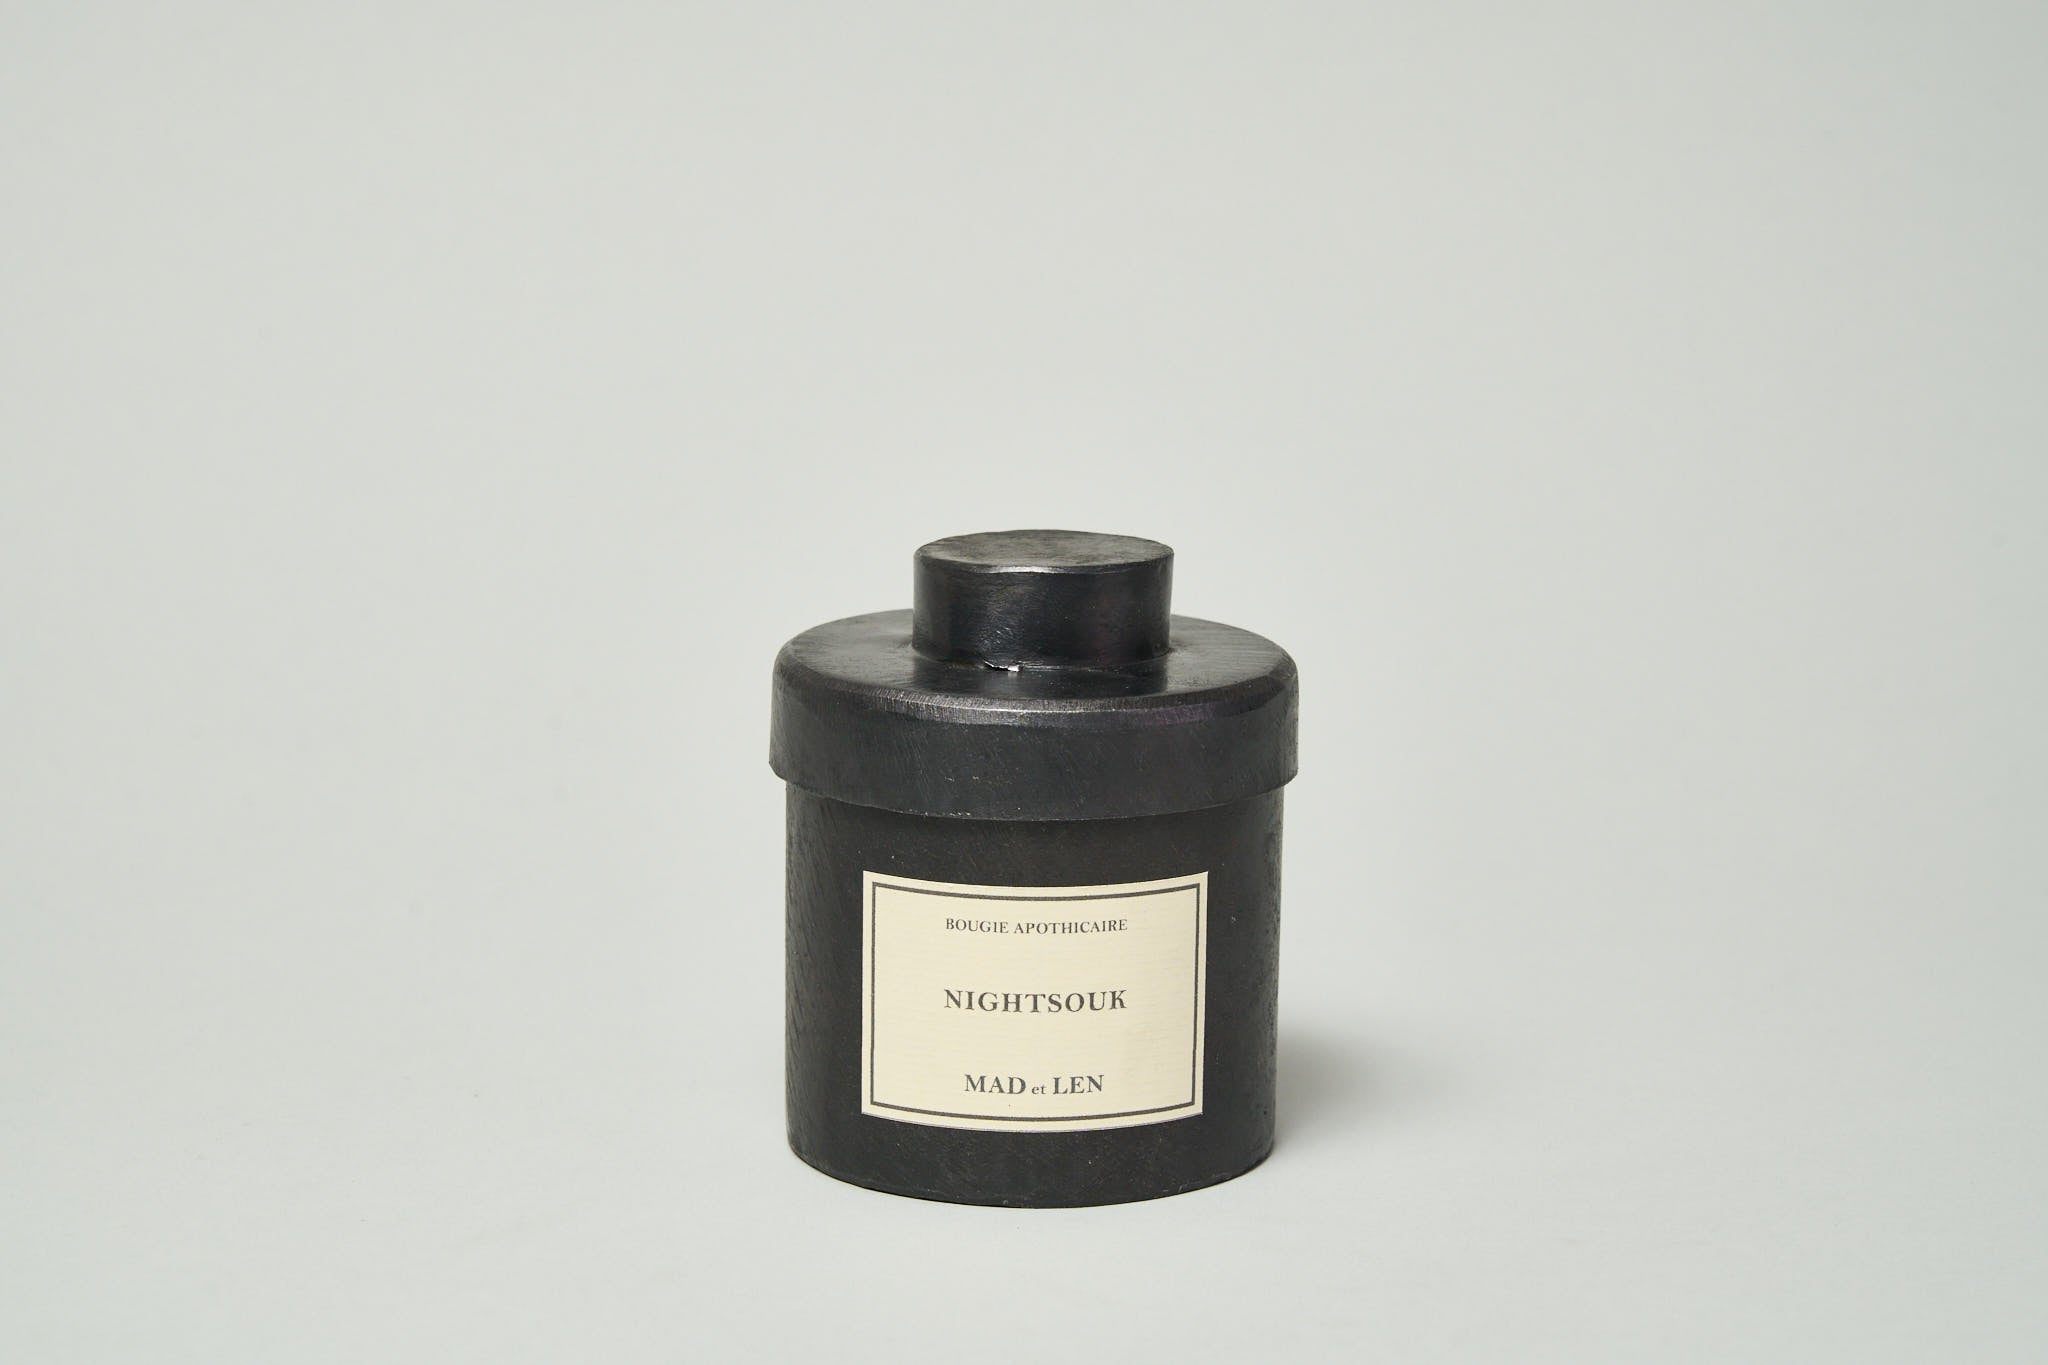 Mad et Len small apothicaire candle – night souk